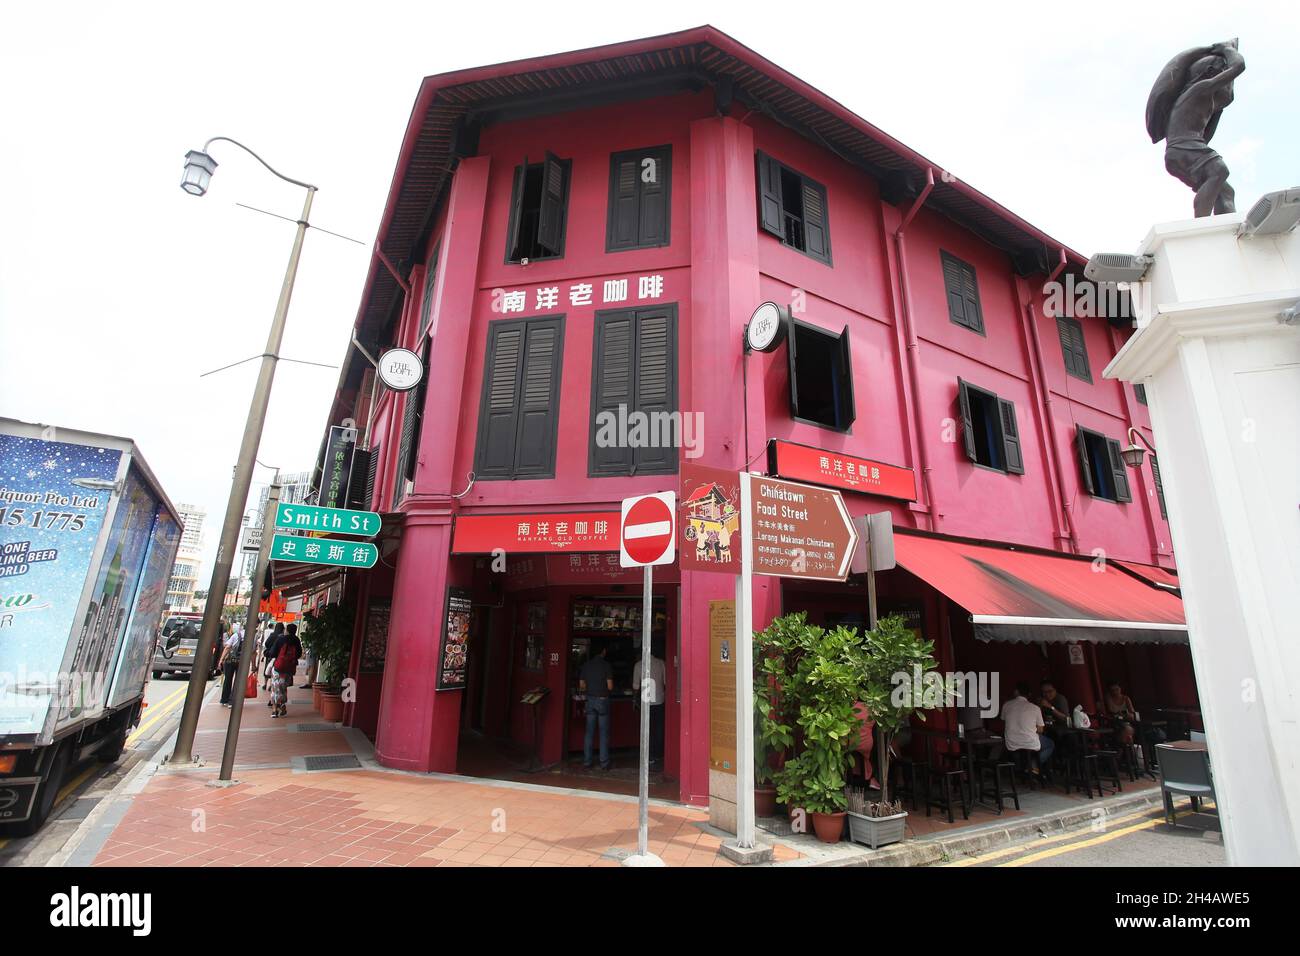 An old red shop house building with brown window shutters iand street name sign for Smith Street in Singapore's Chinatown district. Stock Photo